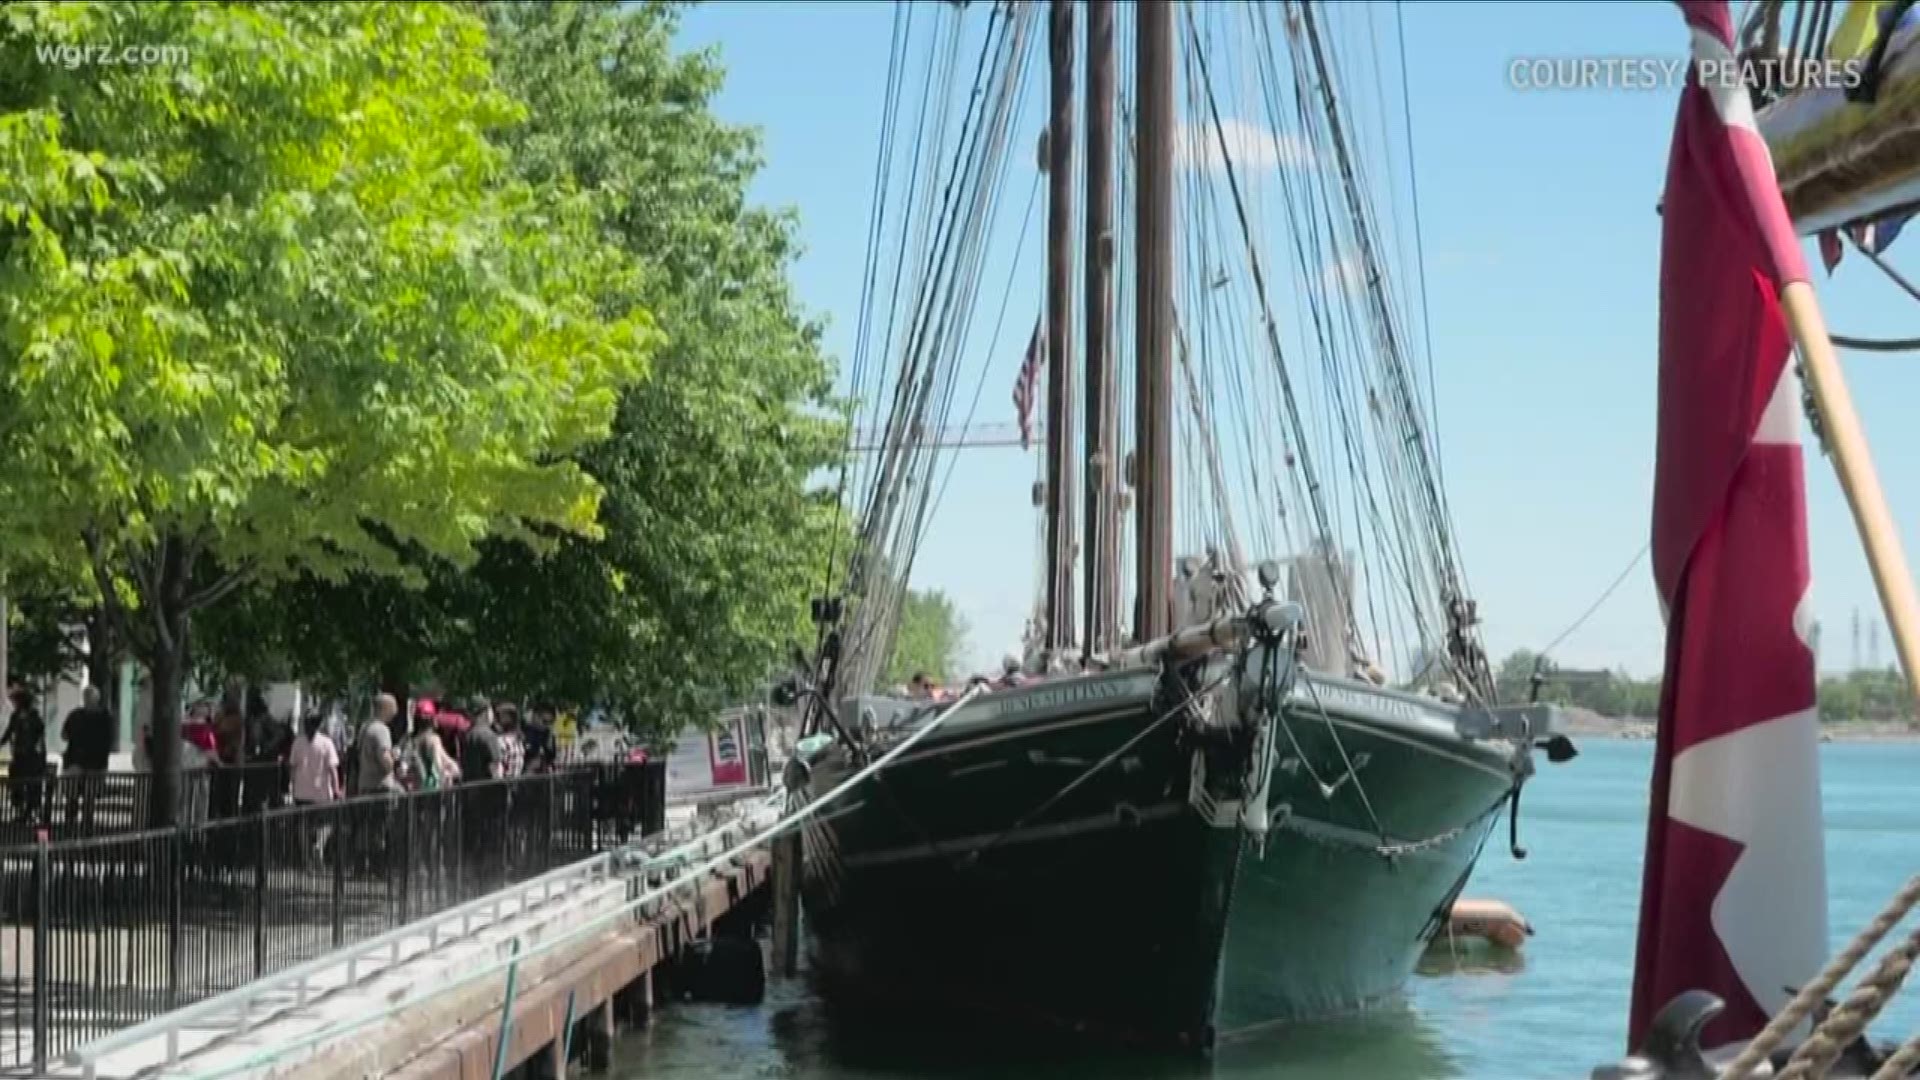 A dozen tall ships will sail into Western New York in just a few days for the "Basil Port of Call Buffalo event."